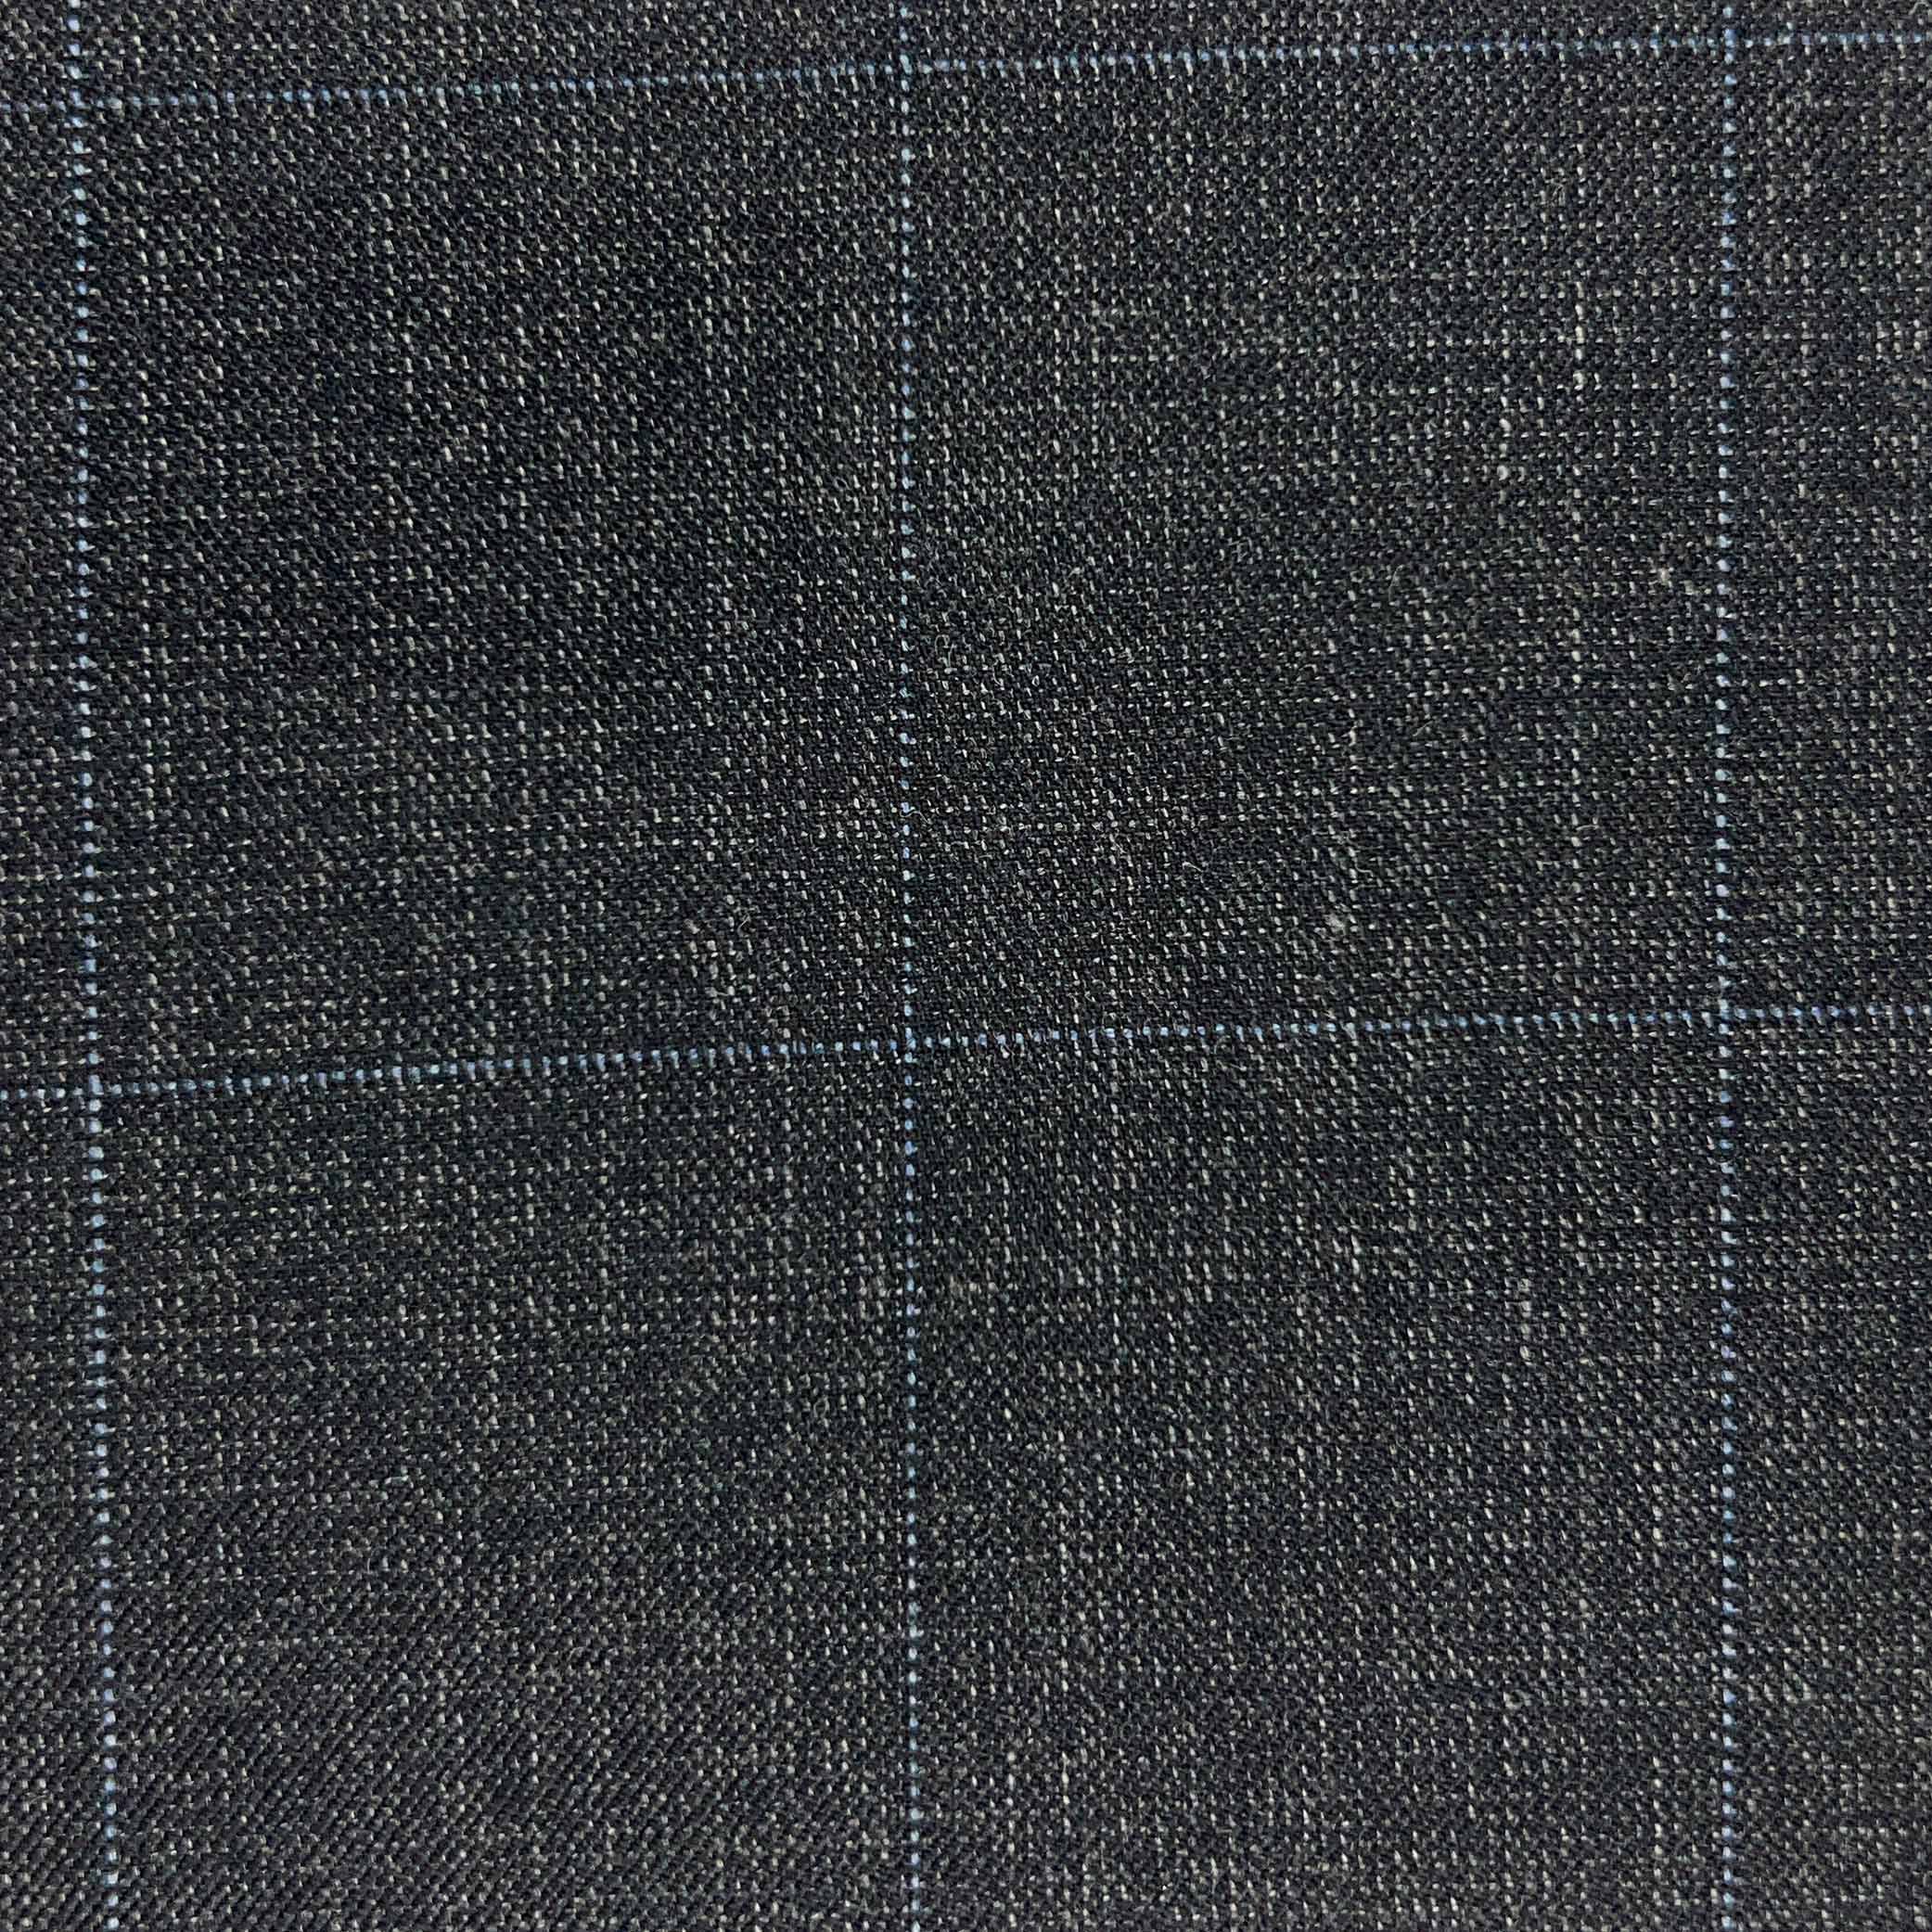 Westwood Hart Online Custom Hand Tailor Suits Sportcoats Trousers Waistcoats Overcoats Charcoal Black With Fine Blue Windowpane